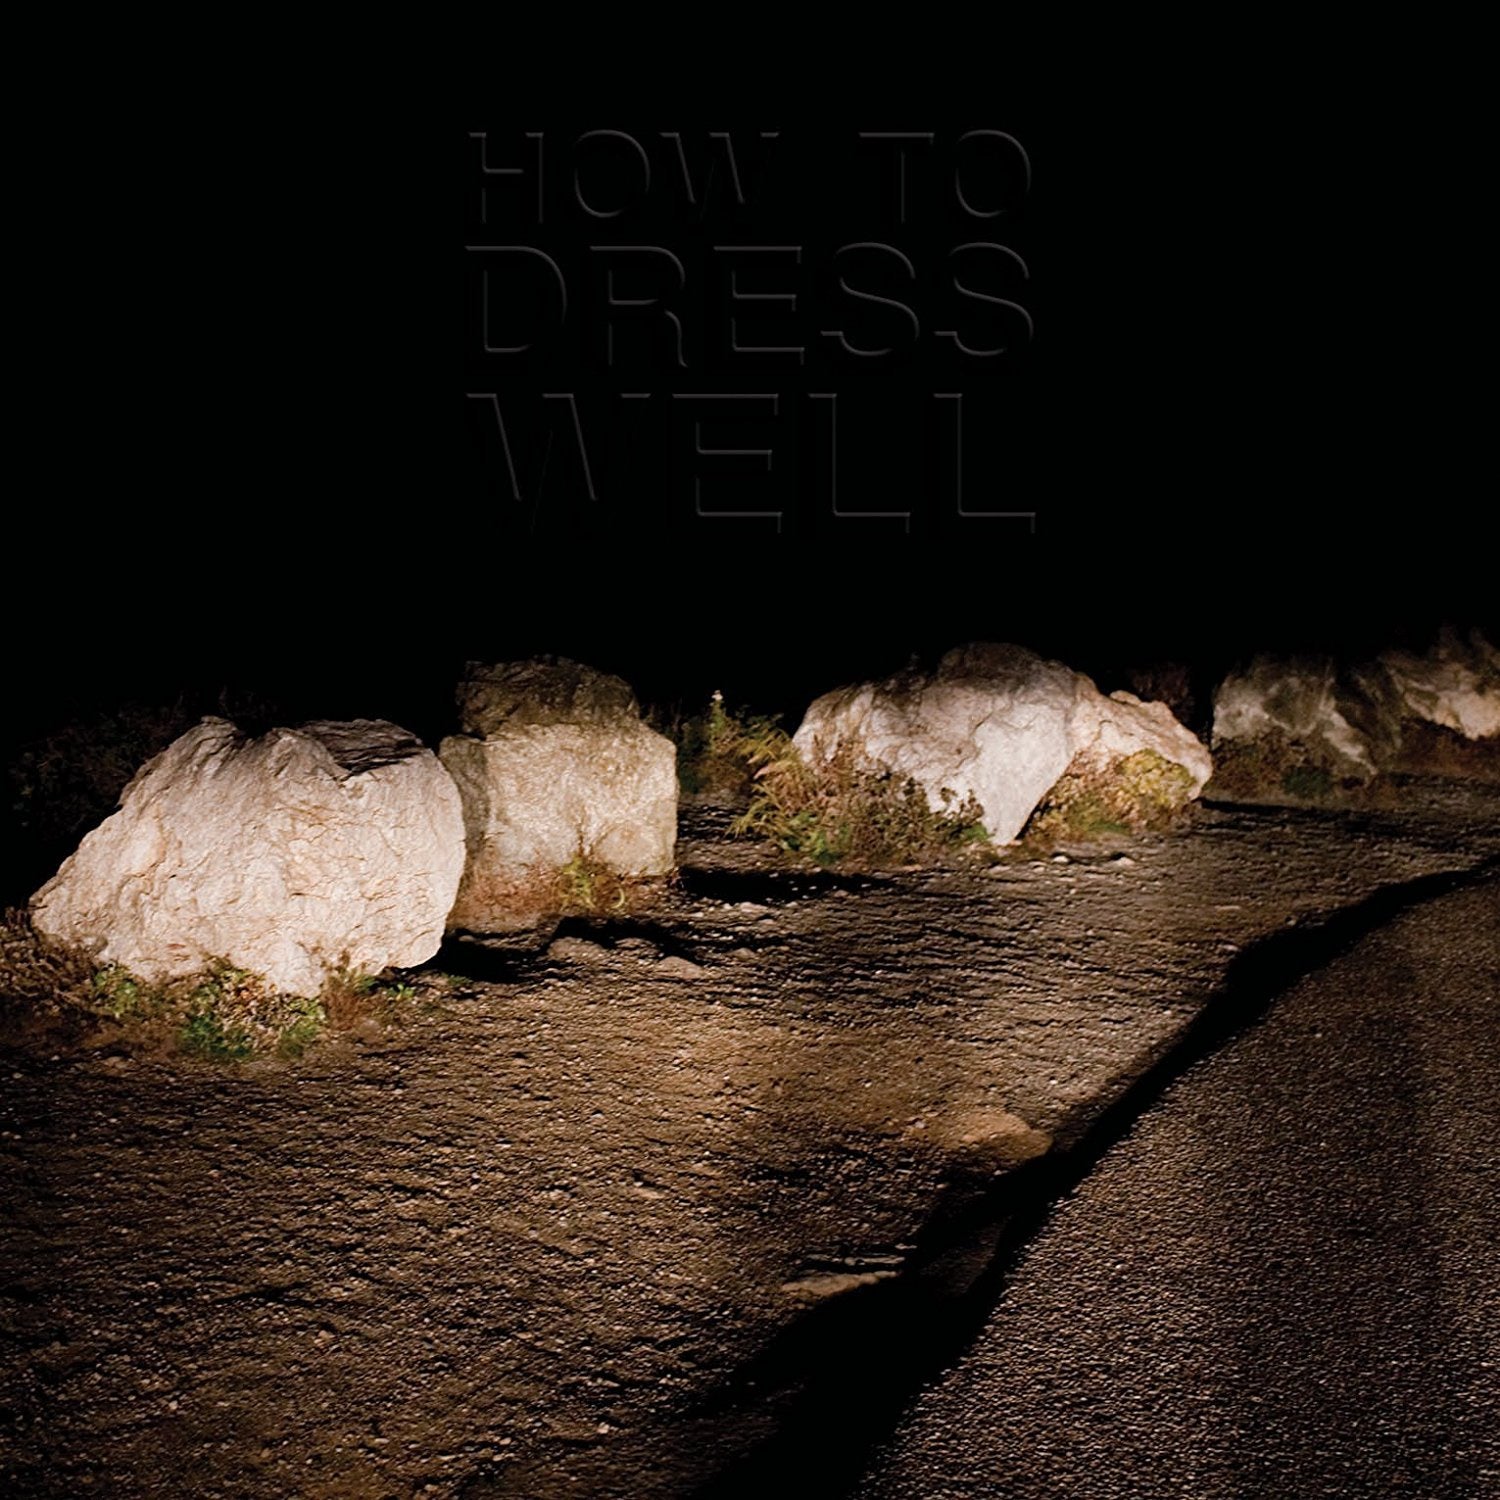 How To Dress Well ‎– Love Remains - New Vinyl Lp 2017 Domino Reissue with Download - Electronic / Leftfield